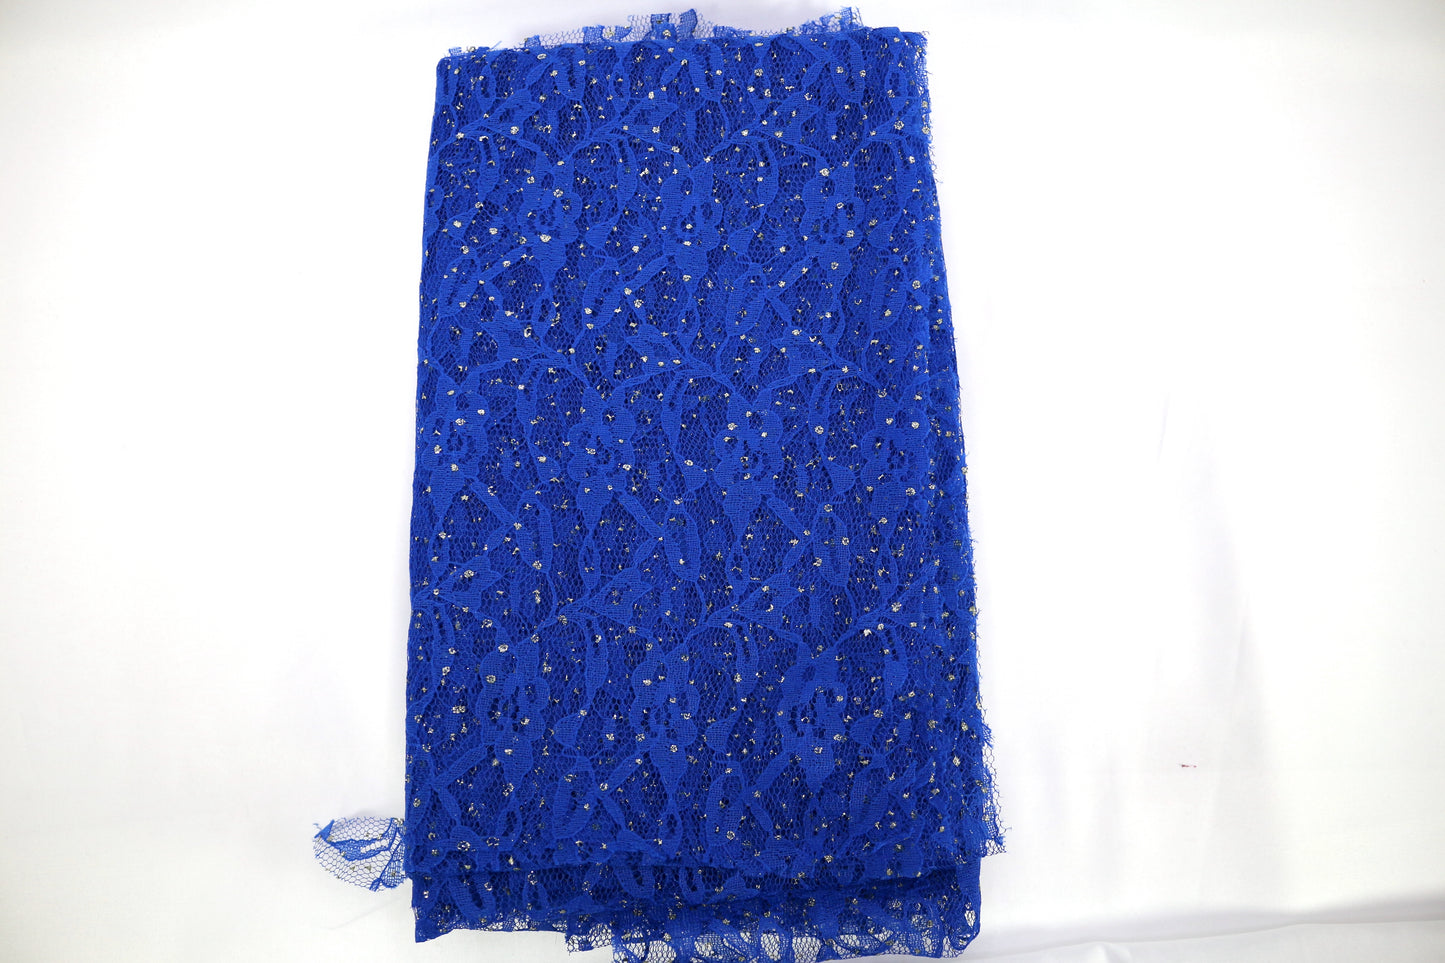 Cosmic Blue Lacy with Glitter Sparkles Bundle